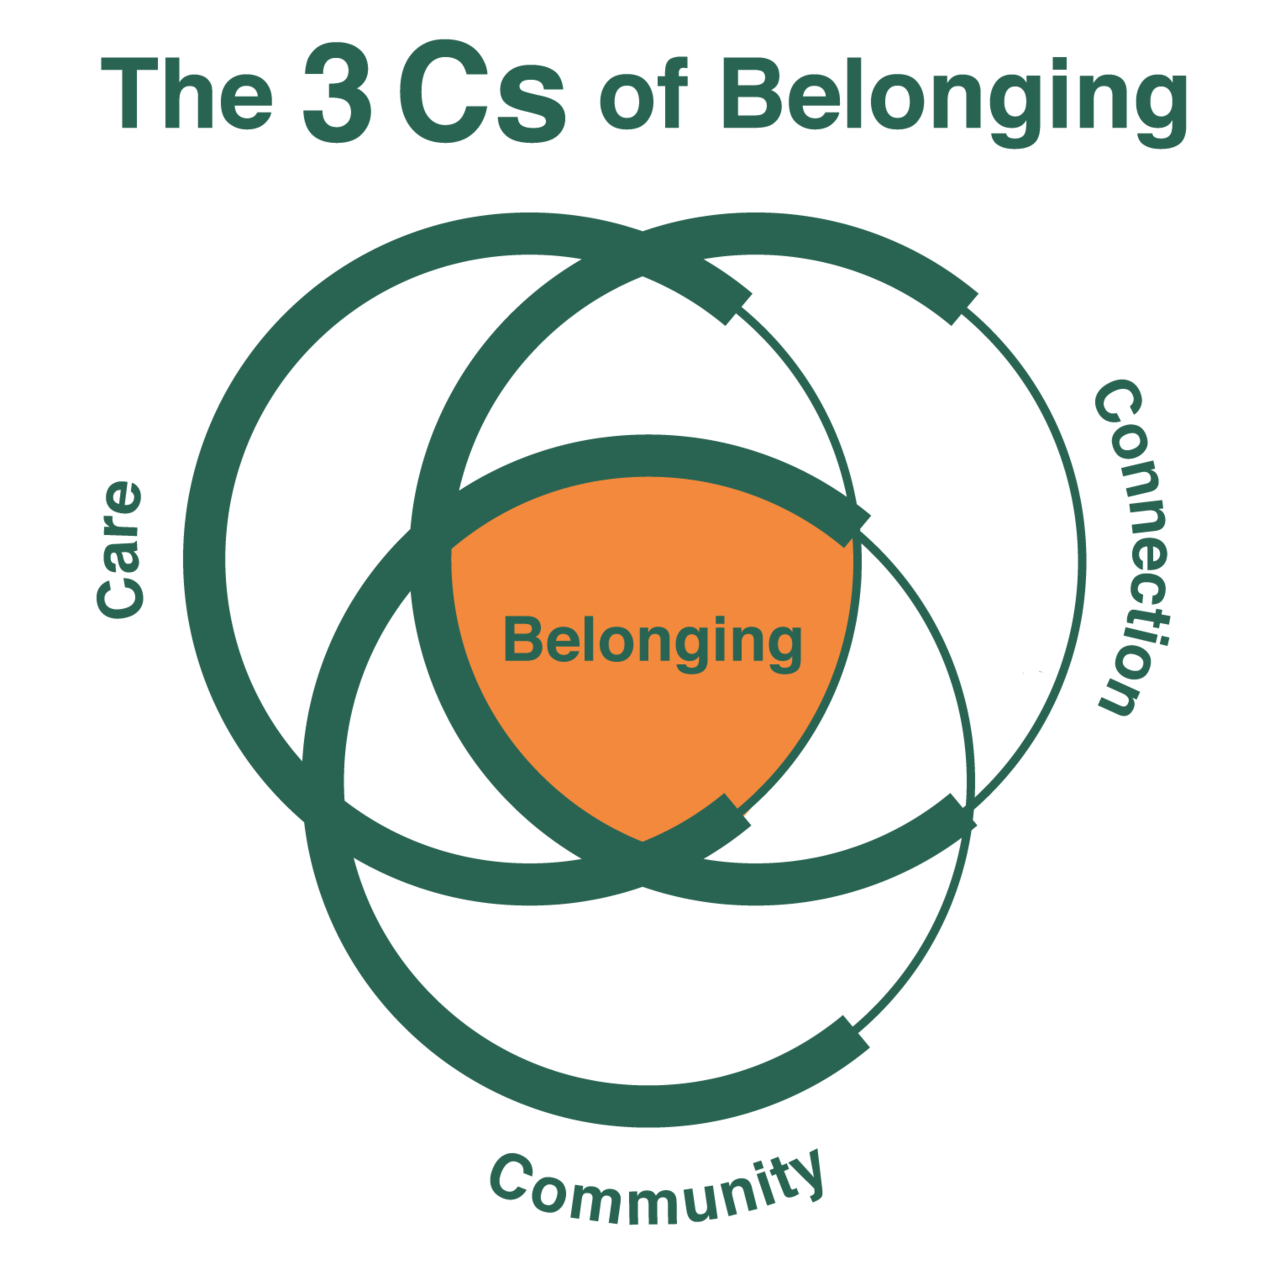 The 3 Cs of Belonging: Care, Connection, and Community